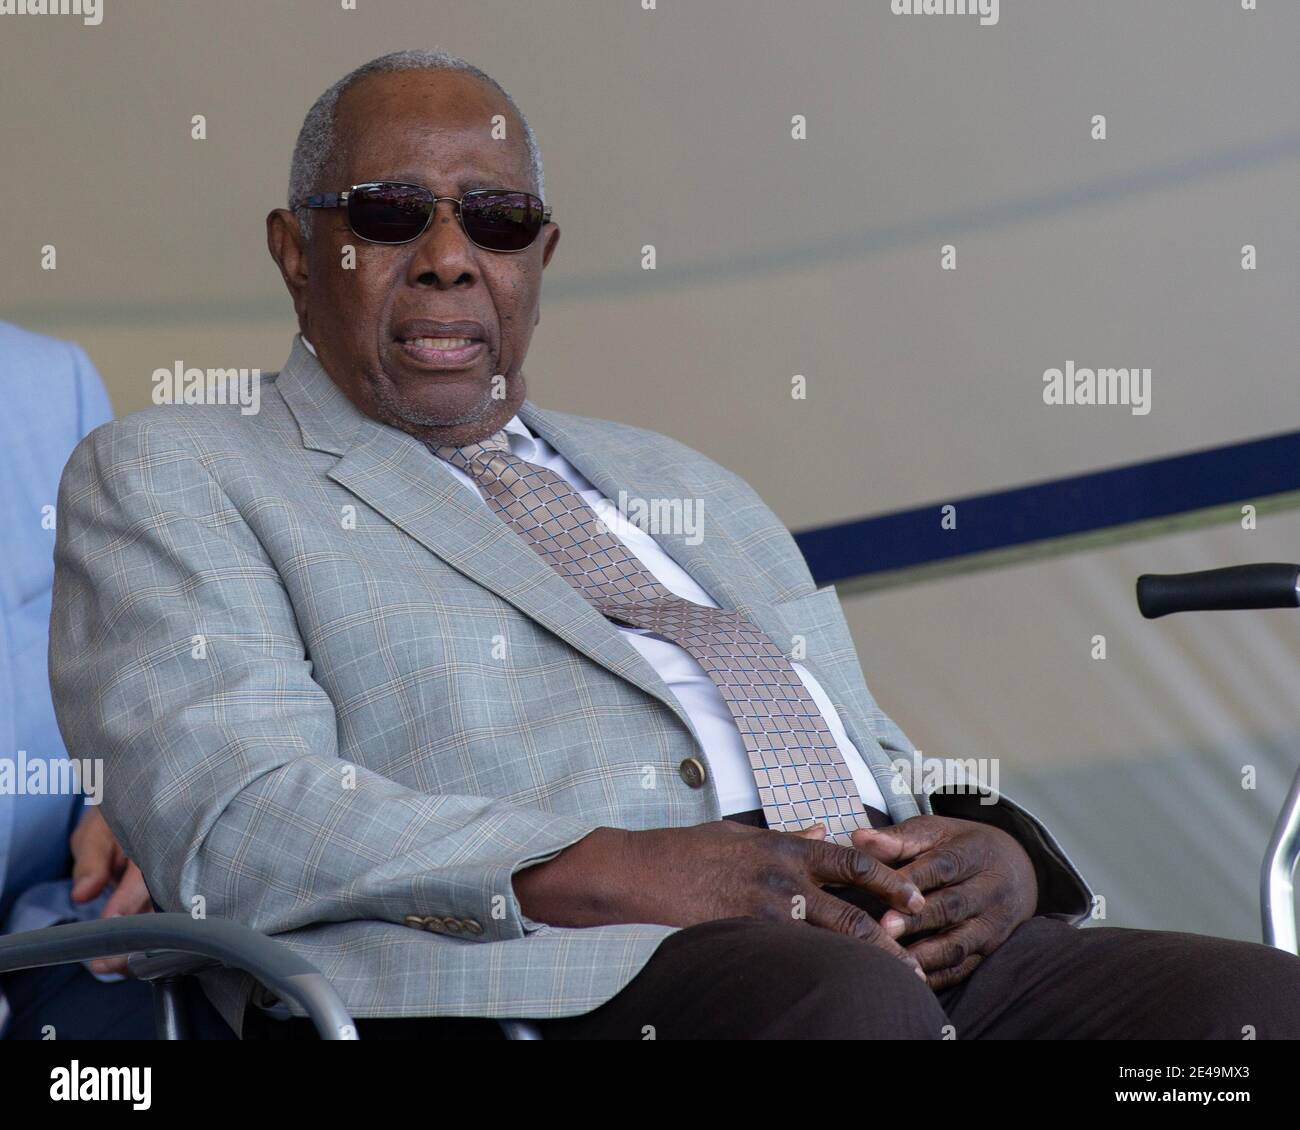 Henry Louis 'Hank' Aaron, Hall of Famer who had 755 career home runs has died at 86. Shown here at the 2019 MLB Cooperstown HOF Stock Photo